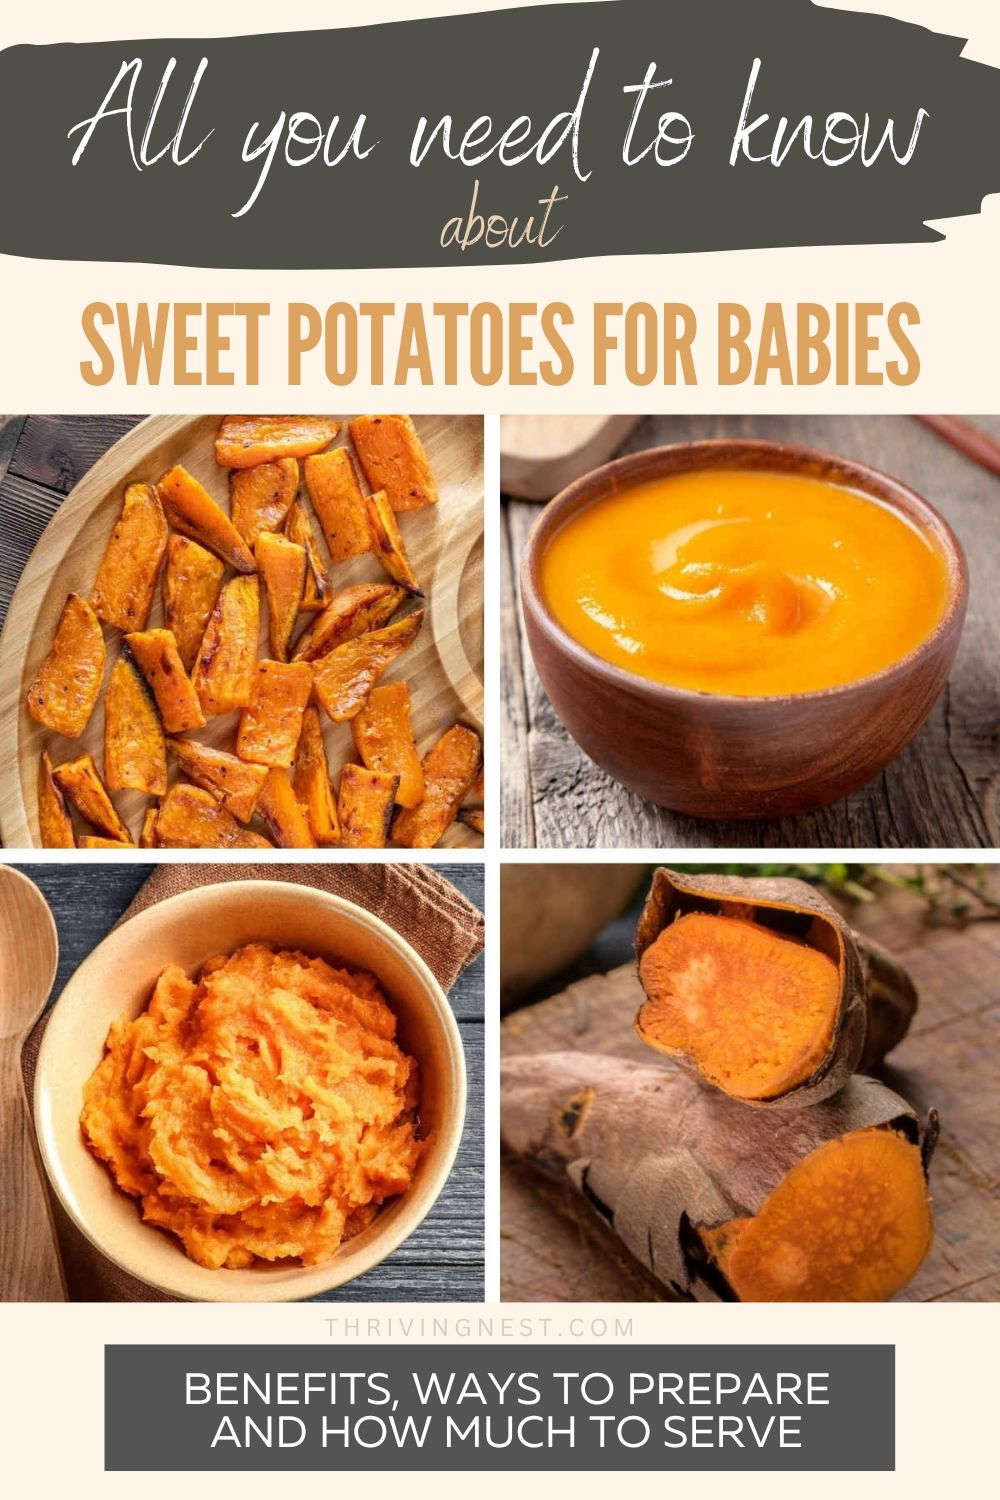 Sweet potato for baby / toddler - a guide about all you need to know: benefits, how to cook, prepare (whether is teamed, roasted, baked, boiled), how to mash and puree for 6 month old babies, and recipes with sweet potatoes for older babies and toddlers including baby led weaning. #sweetpotato #baby #blw #howto #toddler